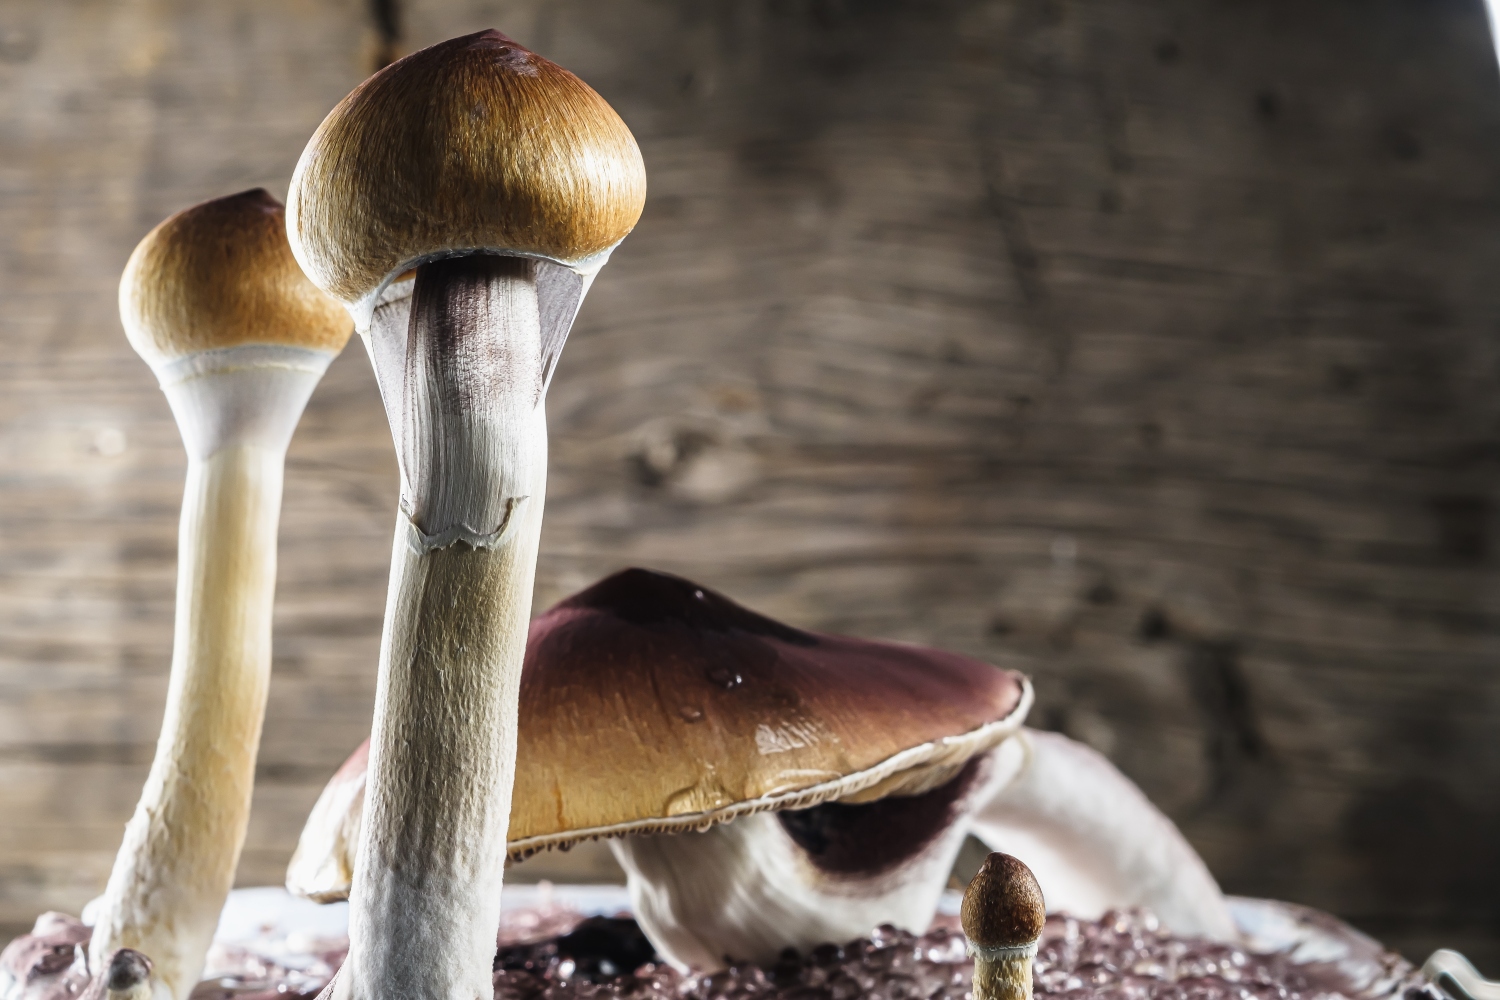 Oregon’s psilocybin program stands on thousands of years of indigenous experience